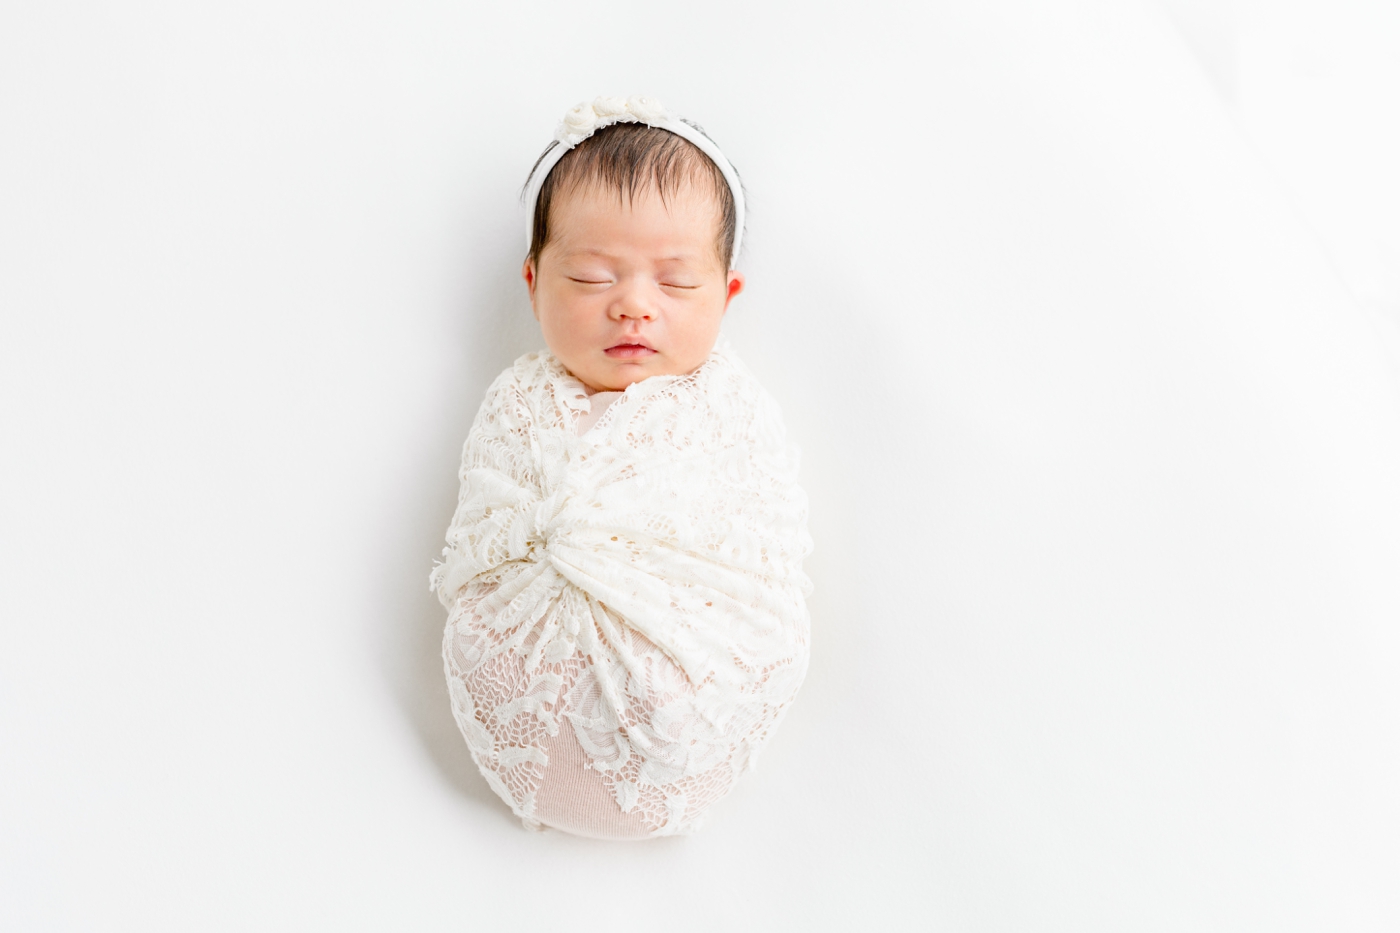 Sleeping baby girl with lace wrap during studio newborn session. Photo by Sana Ahmed Photography.